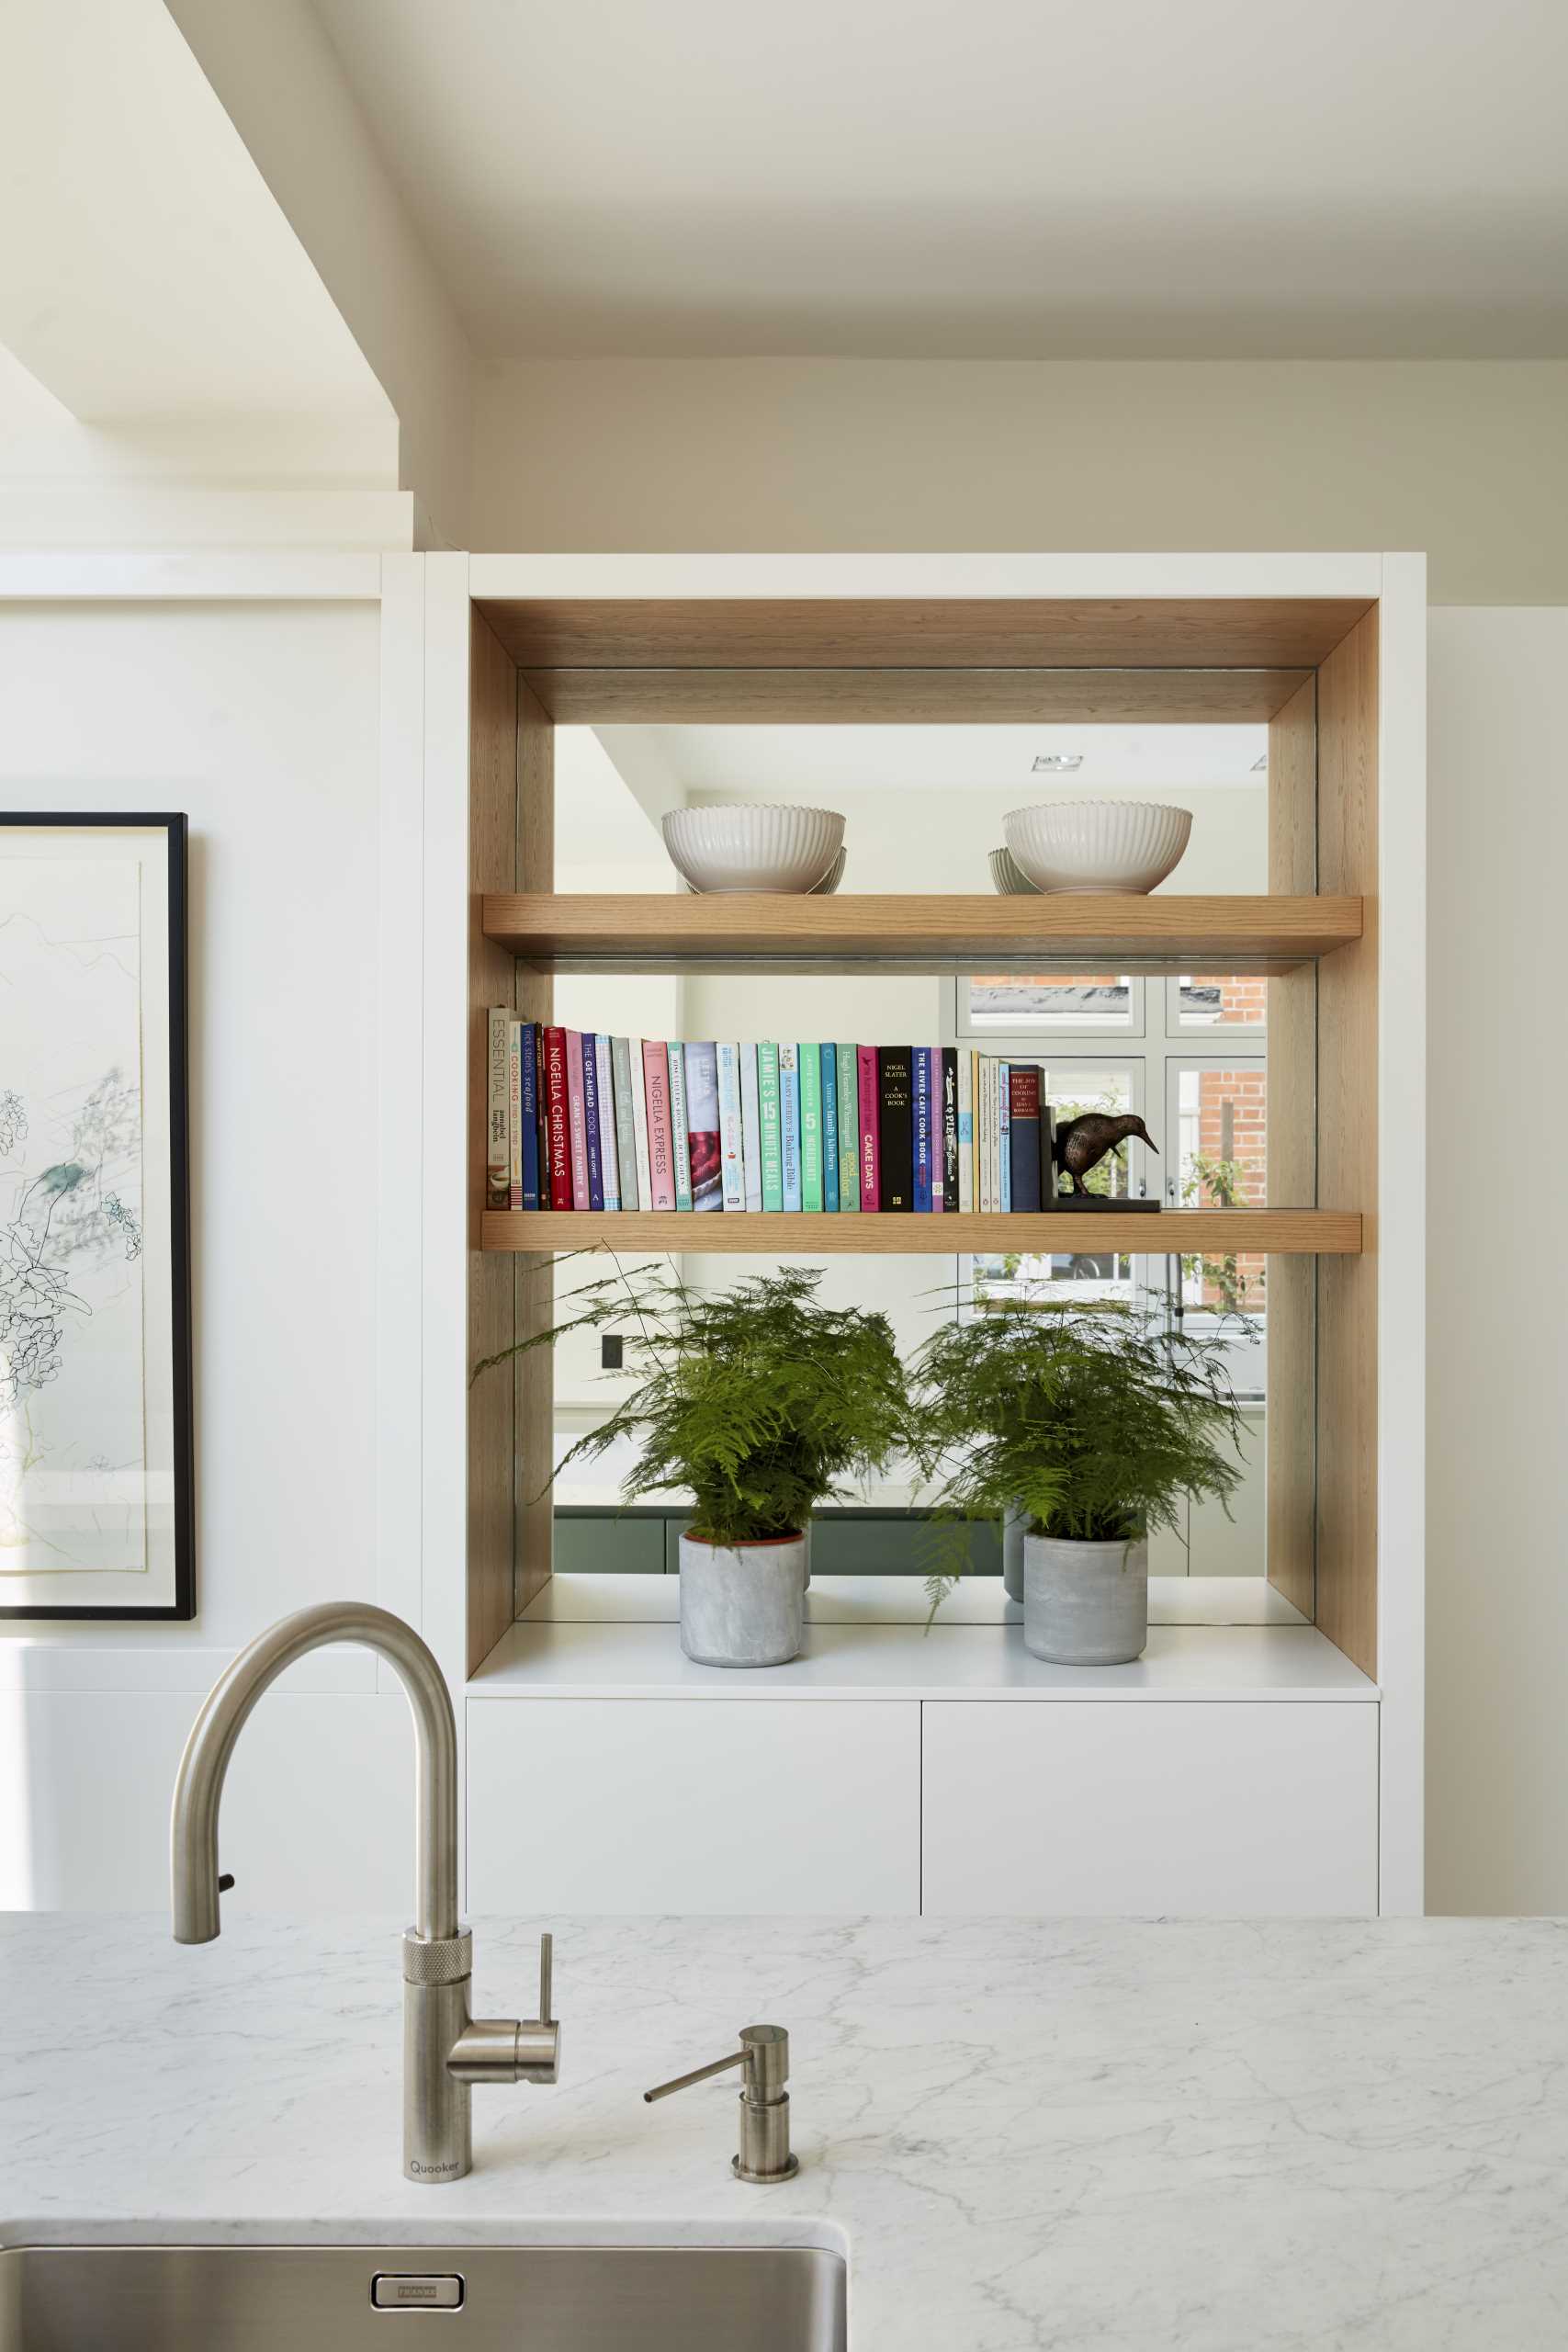 A mirrored built-in shelf creates the feeling of the space being larger than it is.